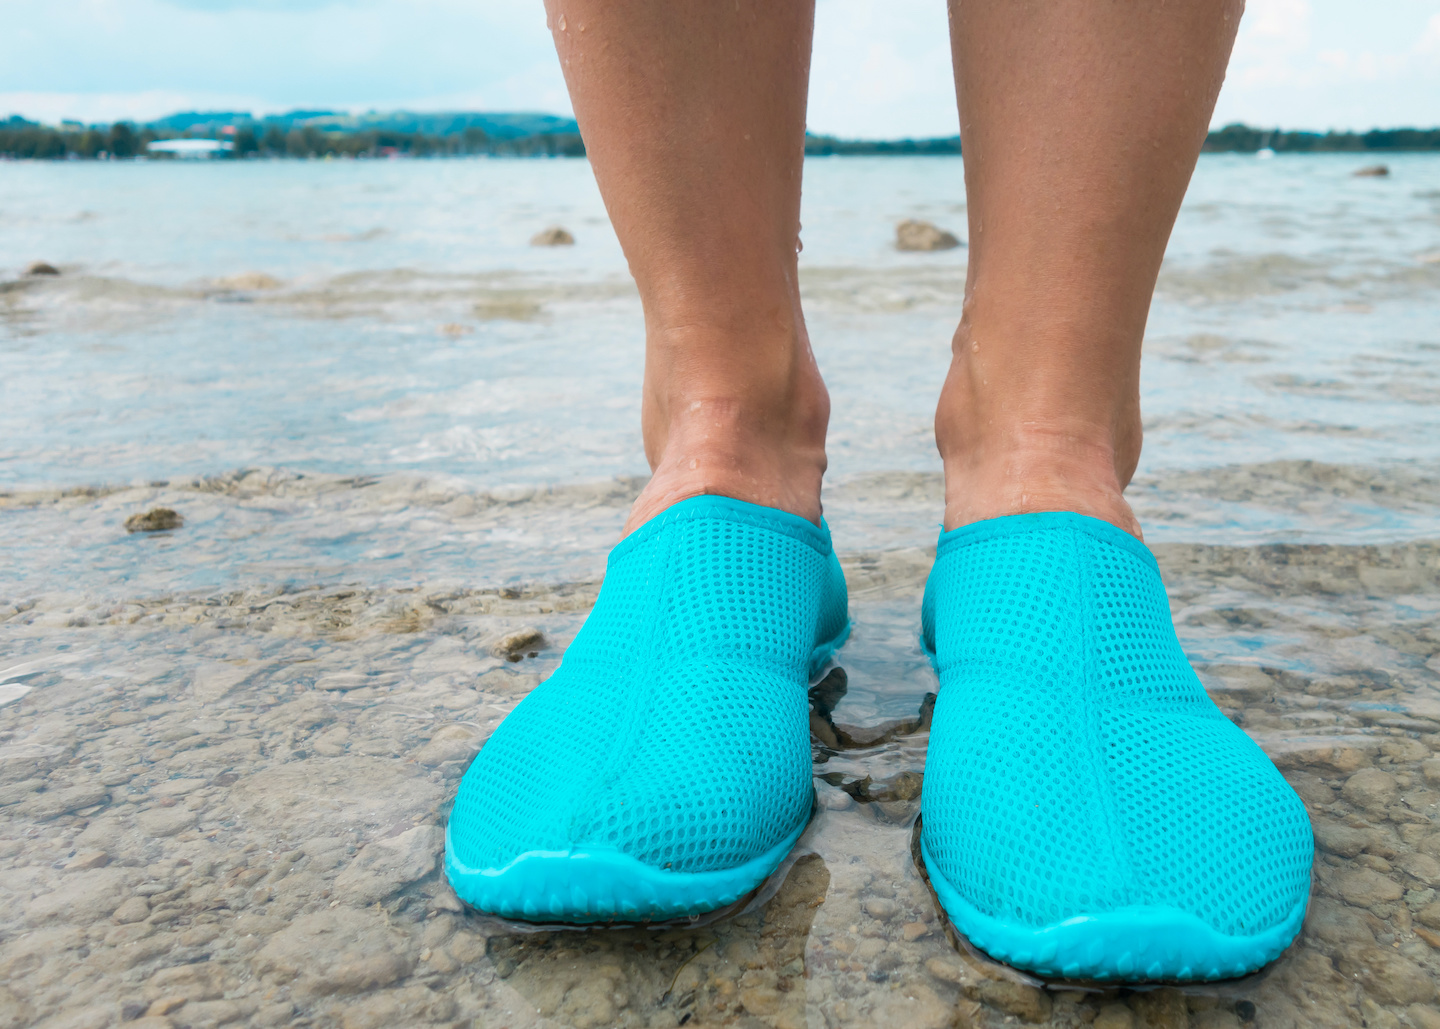 Footwear for outdoor swimming - Outdoor Swimmer Magazine